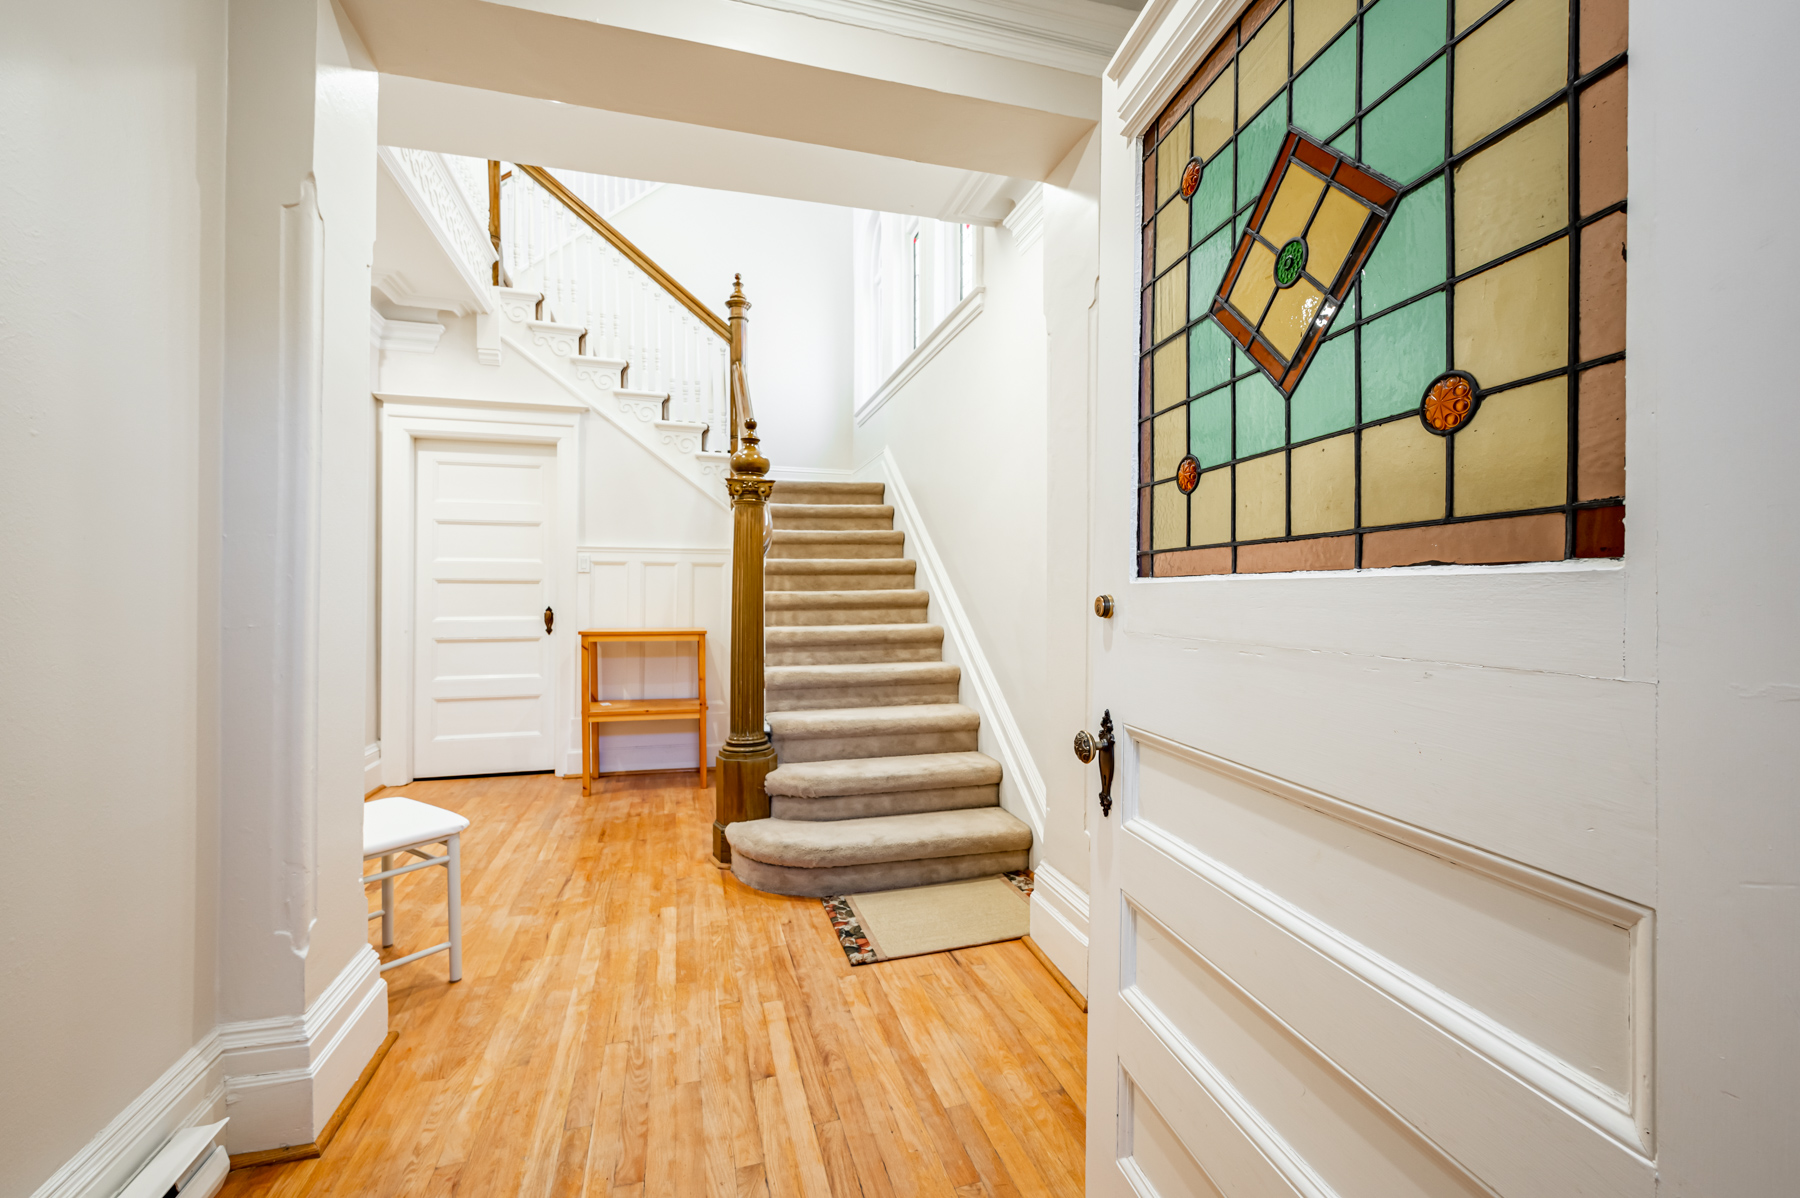 98 Bedford Rd foyer with hardwood floors, carpeted stairs and front door with stained glass inserts.